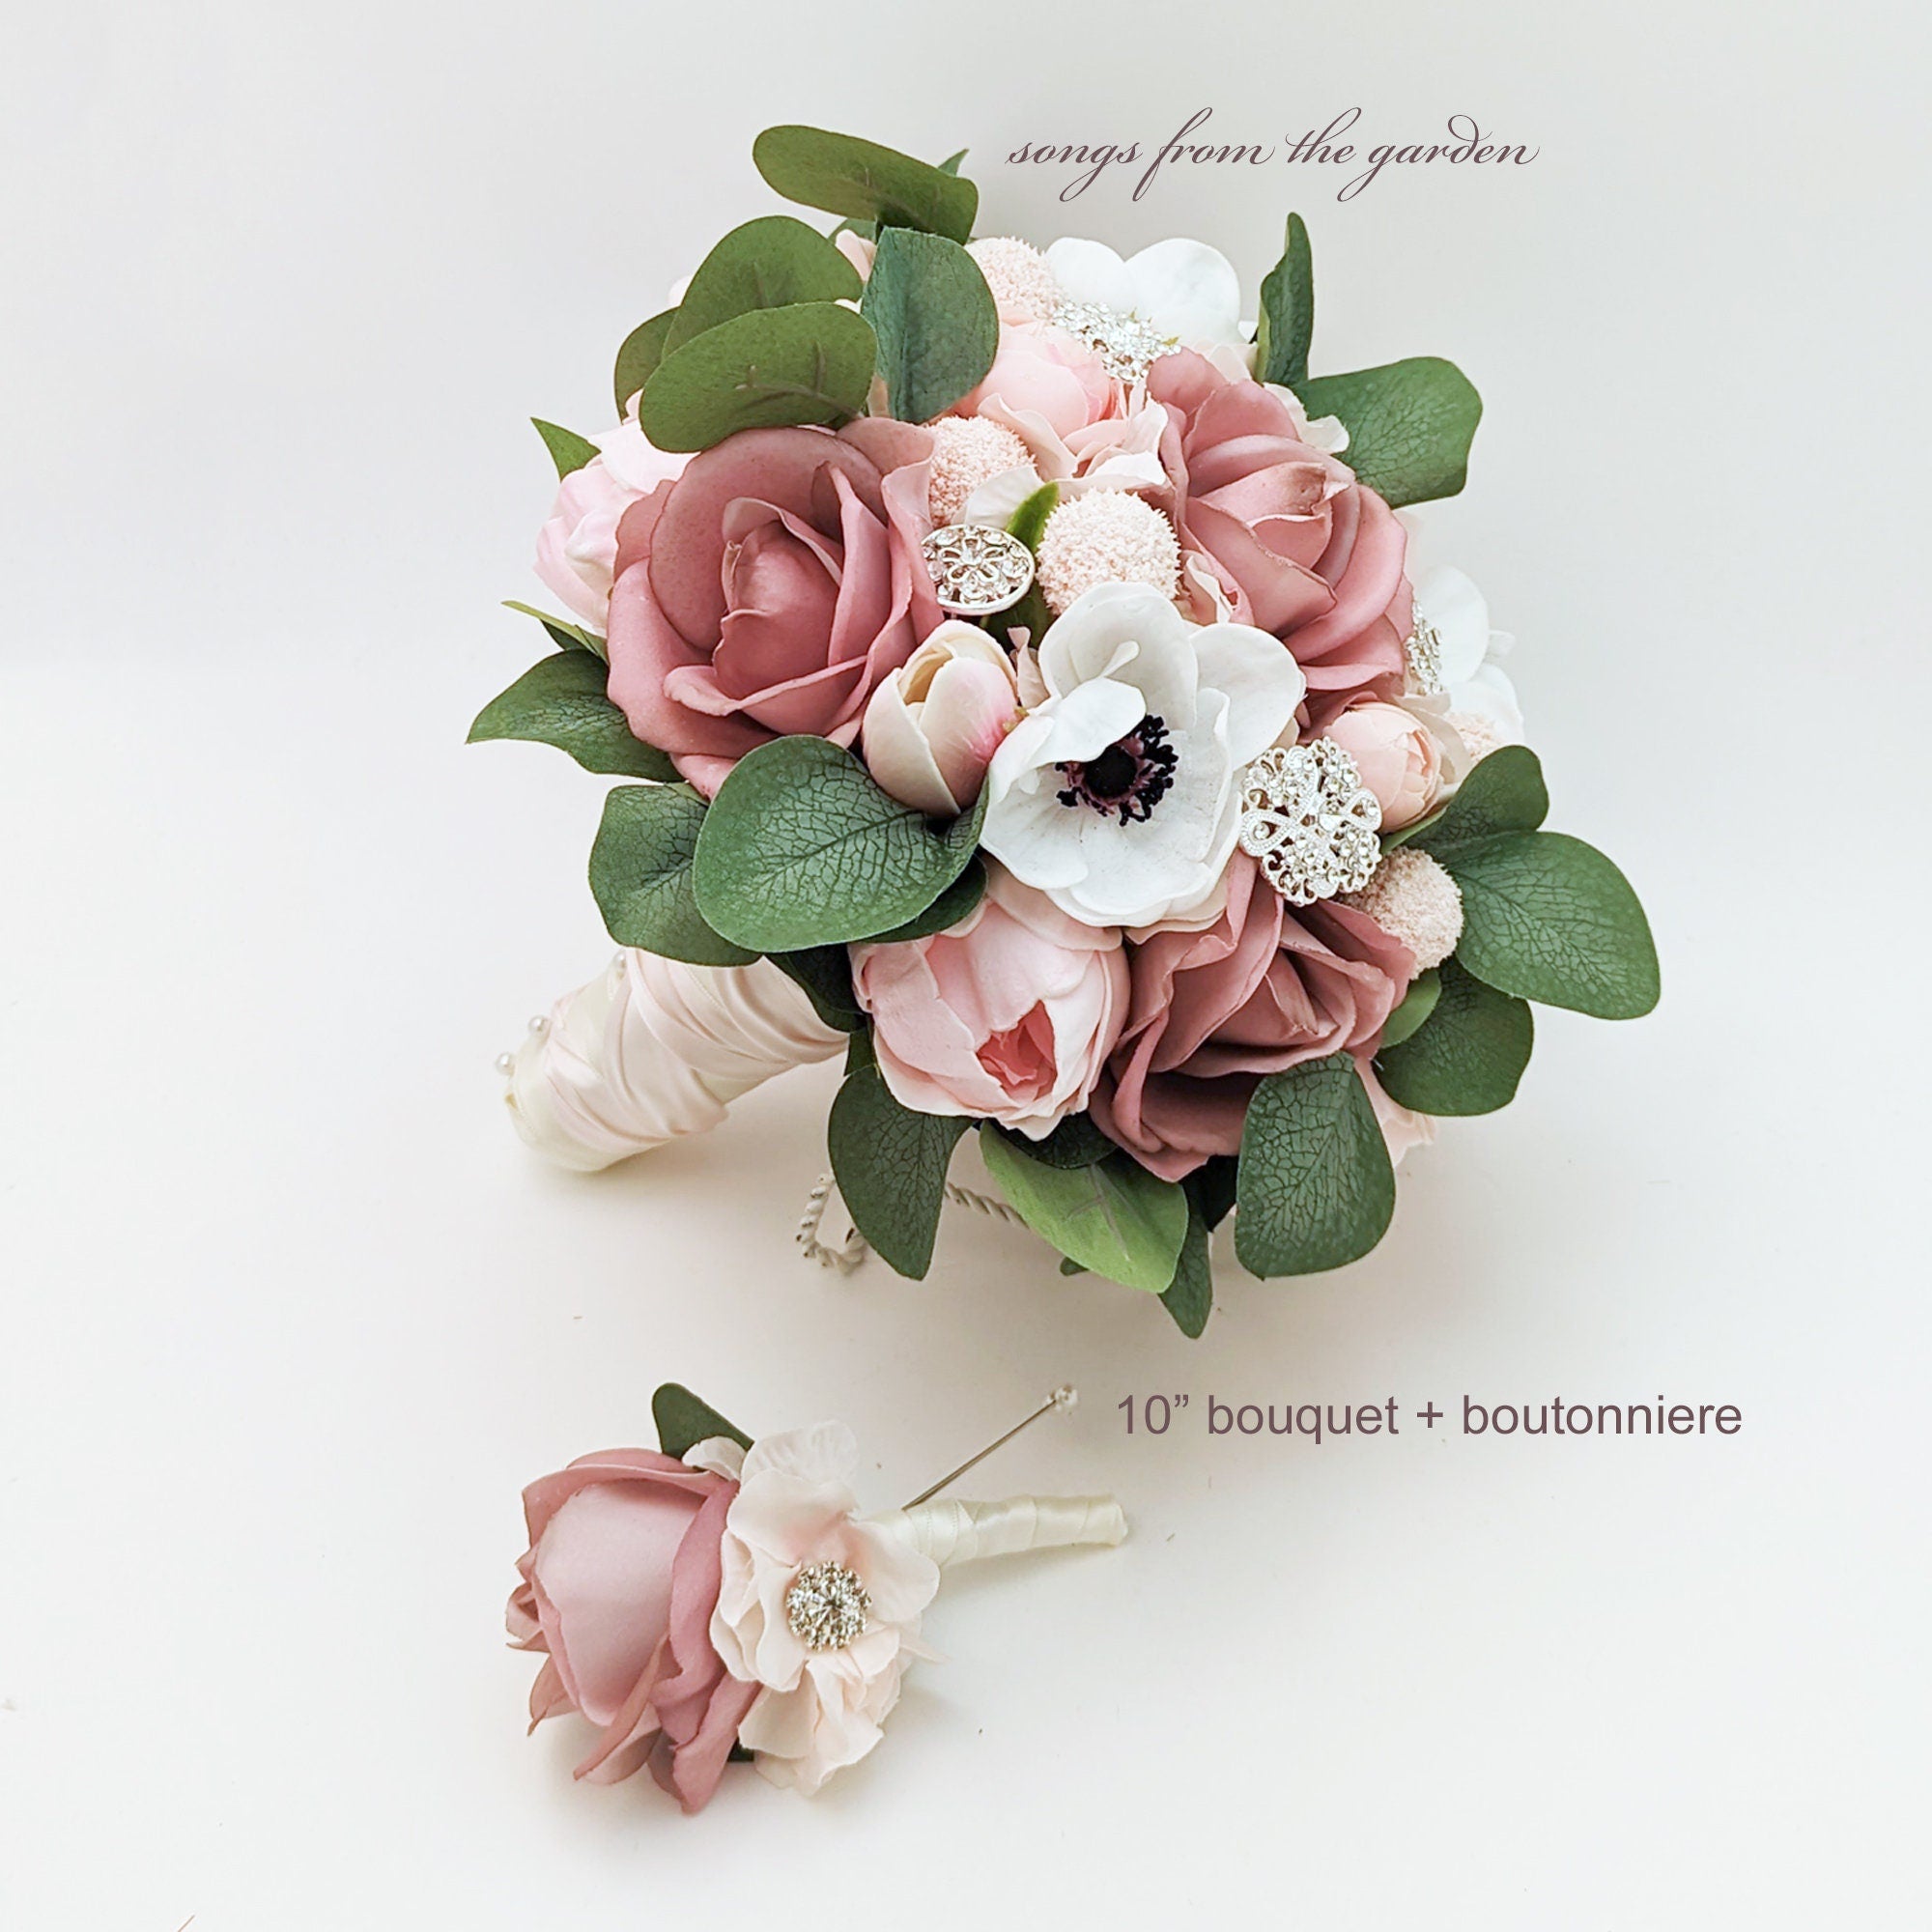 Bridal or Bridesmaid Wedding Bouquet Eucalyptus Peonies Roses Hydrangea Mauve Pink White with Brooches - Add Boutonniere Flower Crown More!